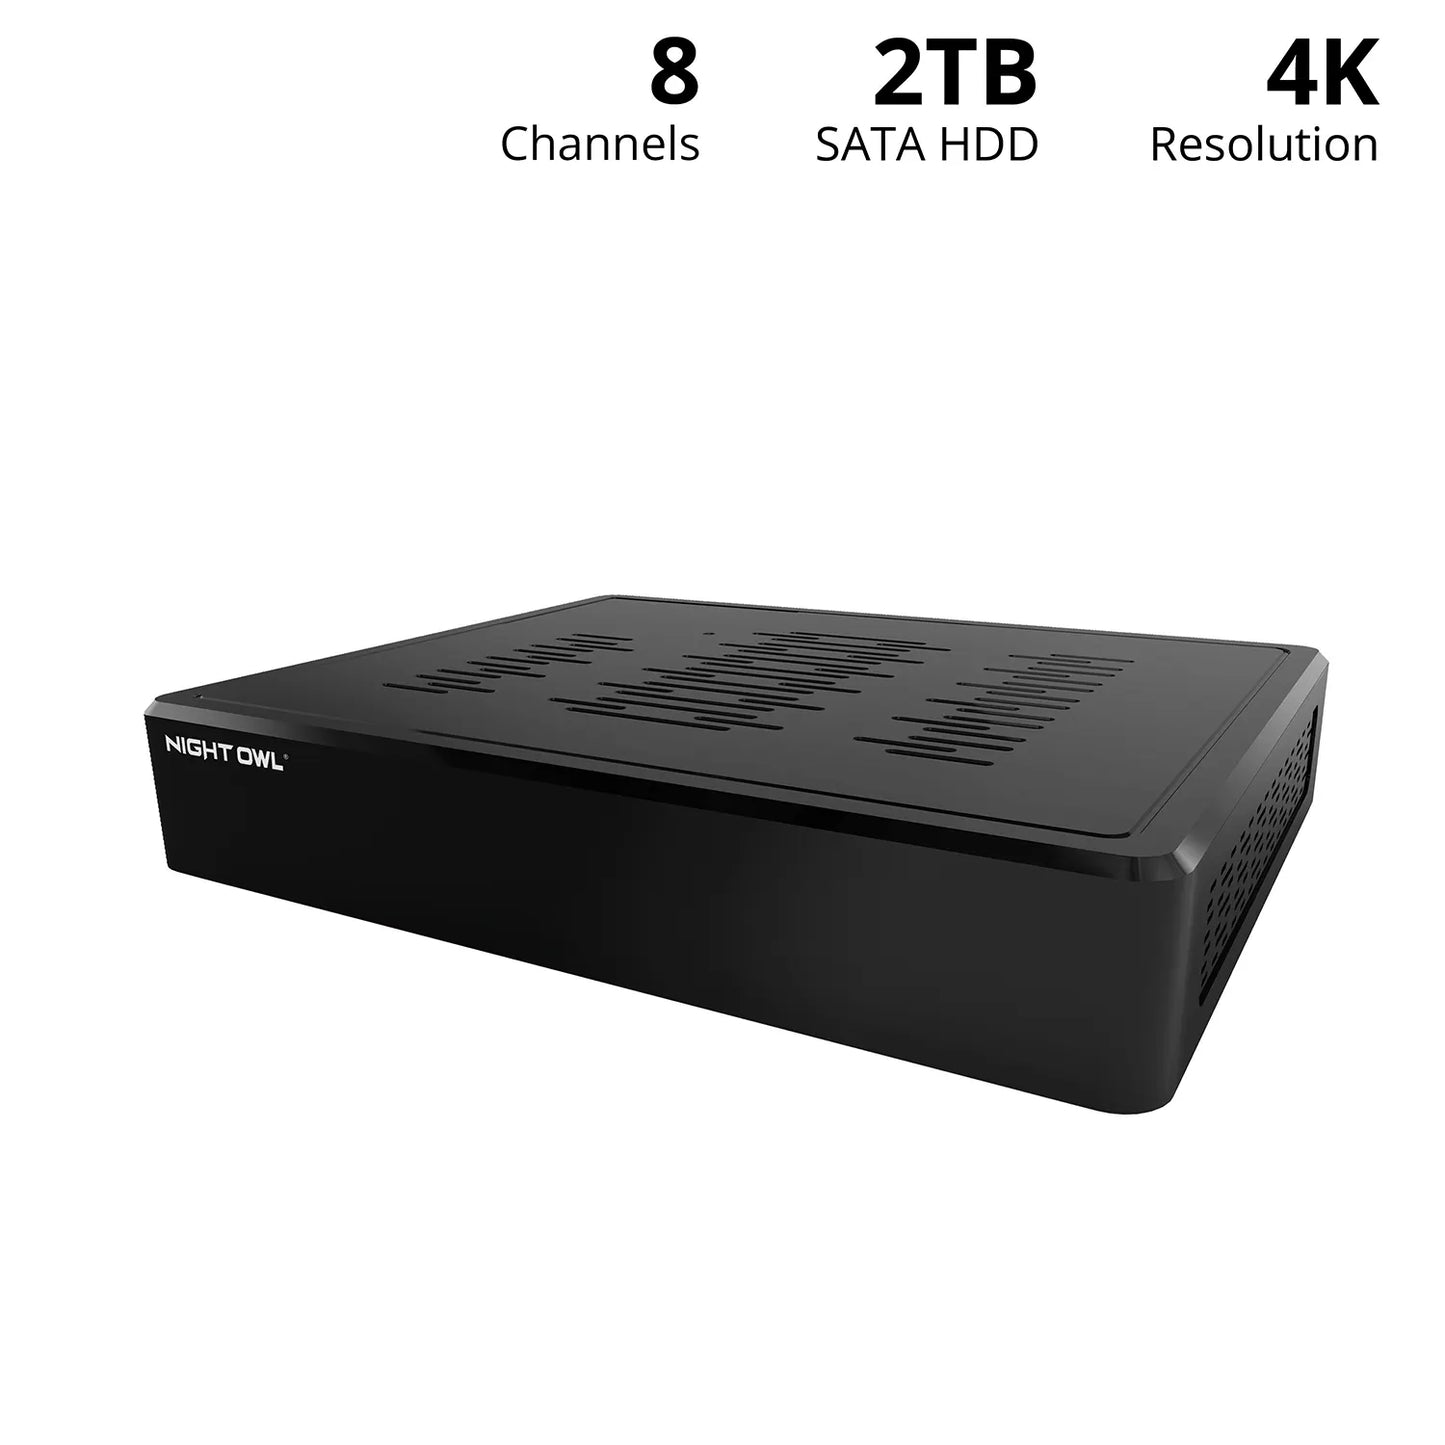 12 Channel 4K Bluetooth NVR with 2TB Hard Drive - Add up to 12 Total Devices